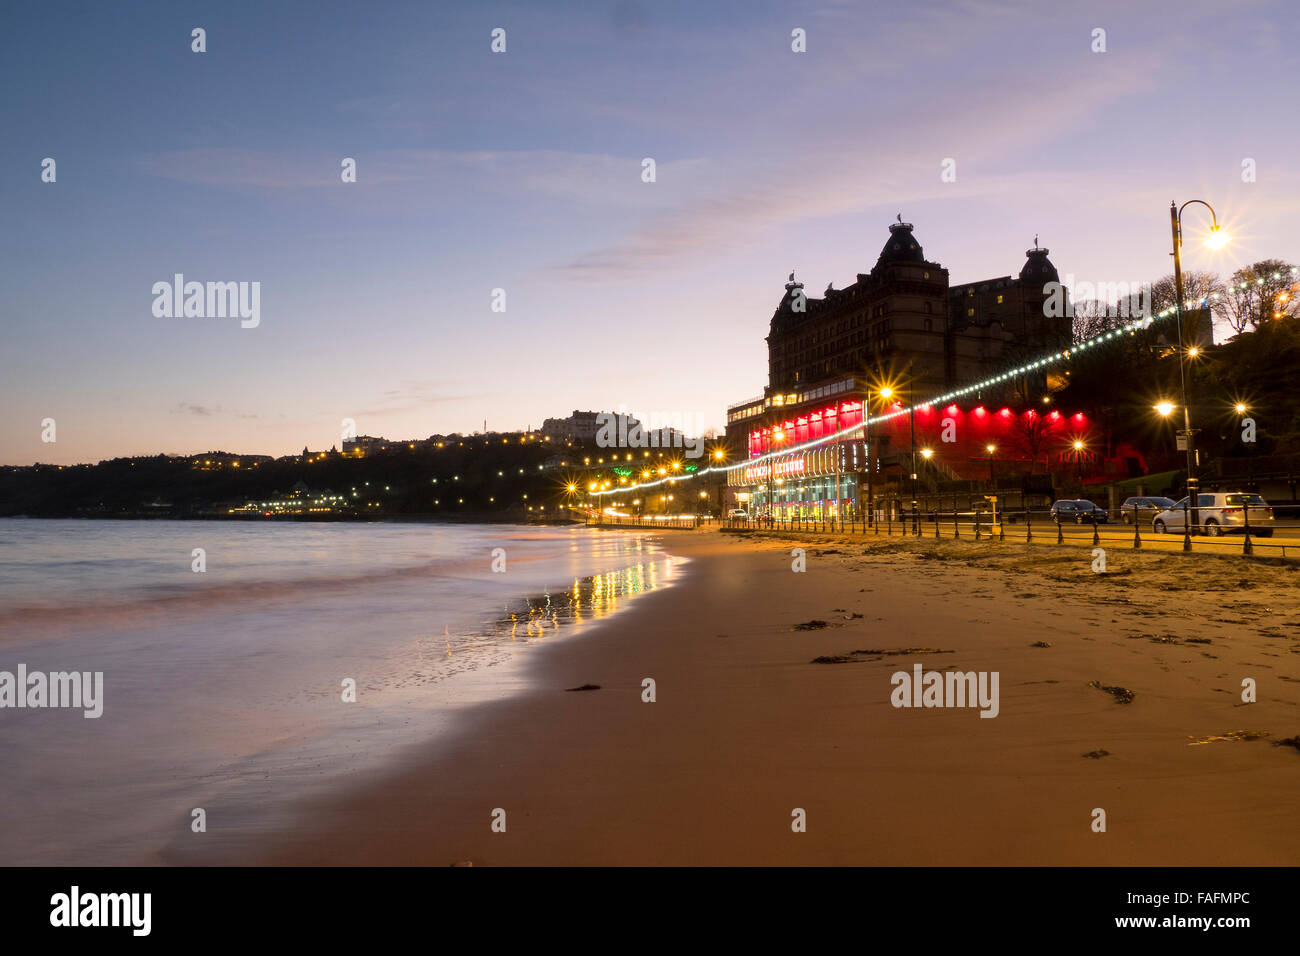 Scarborough South Bay at Dusk at High Tide, North Yorkshire showing the Grand Hotel Stock Photo